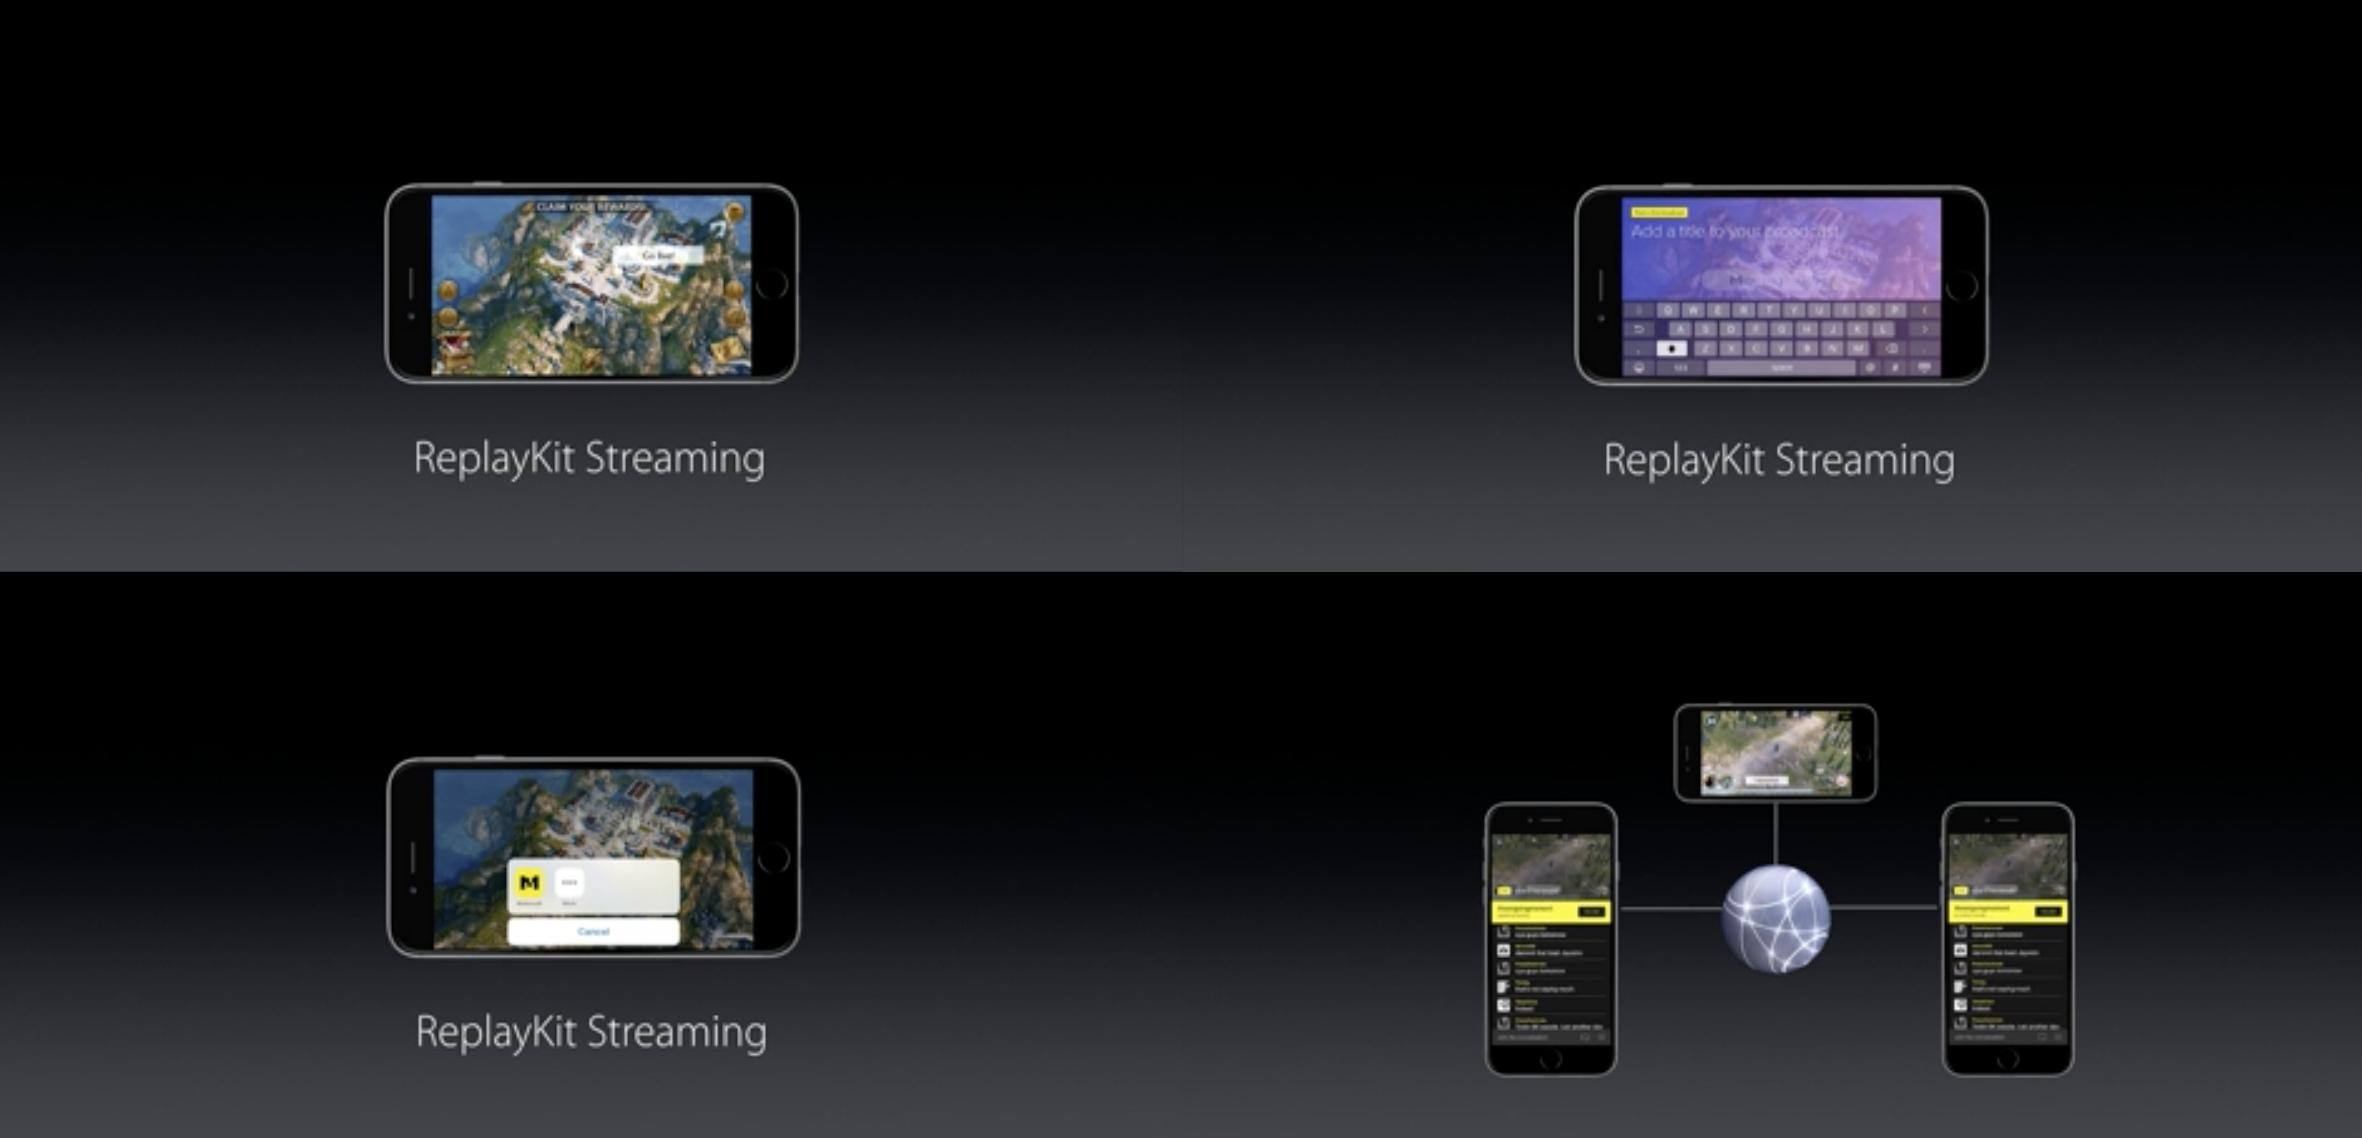 iOS 10 allows live streaming from apps for gameplay & screencast videos